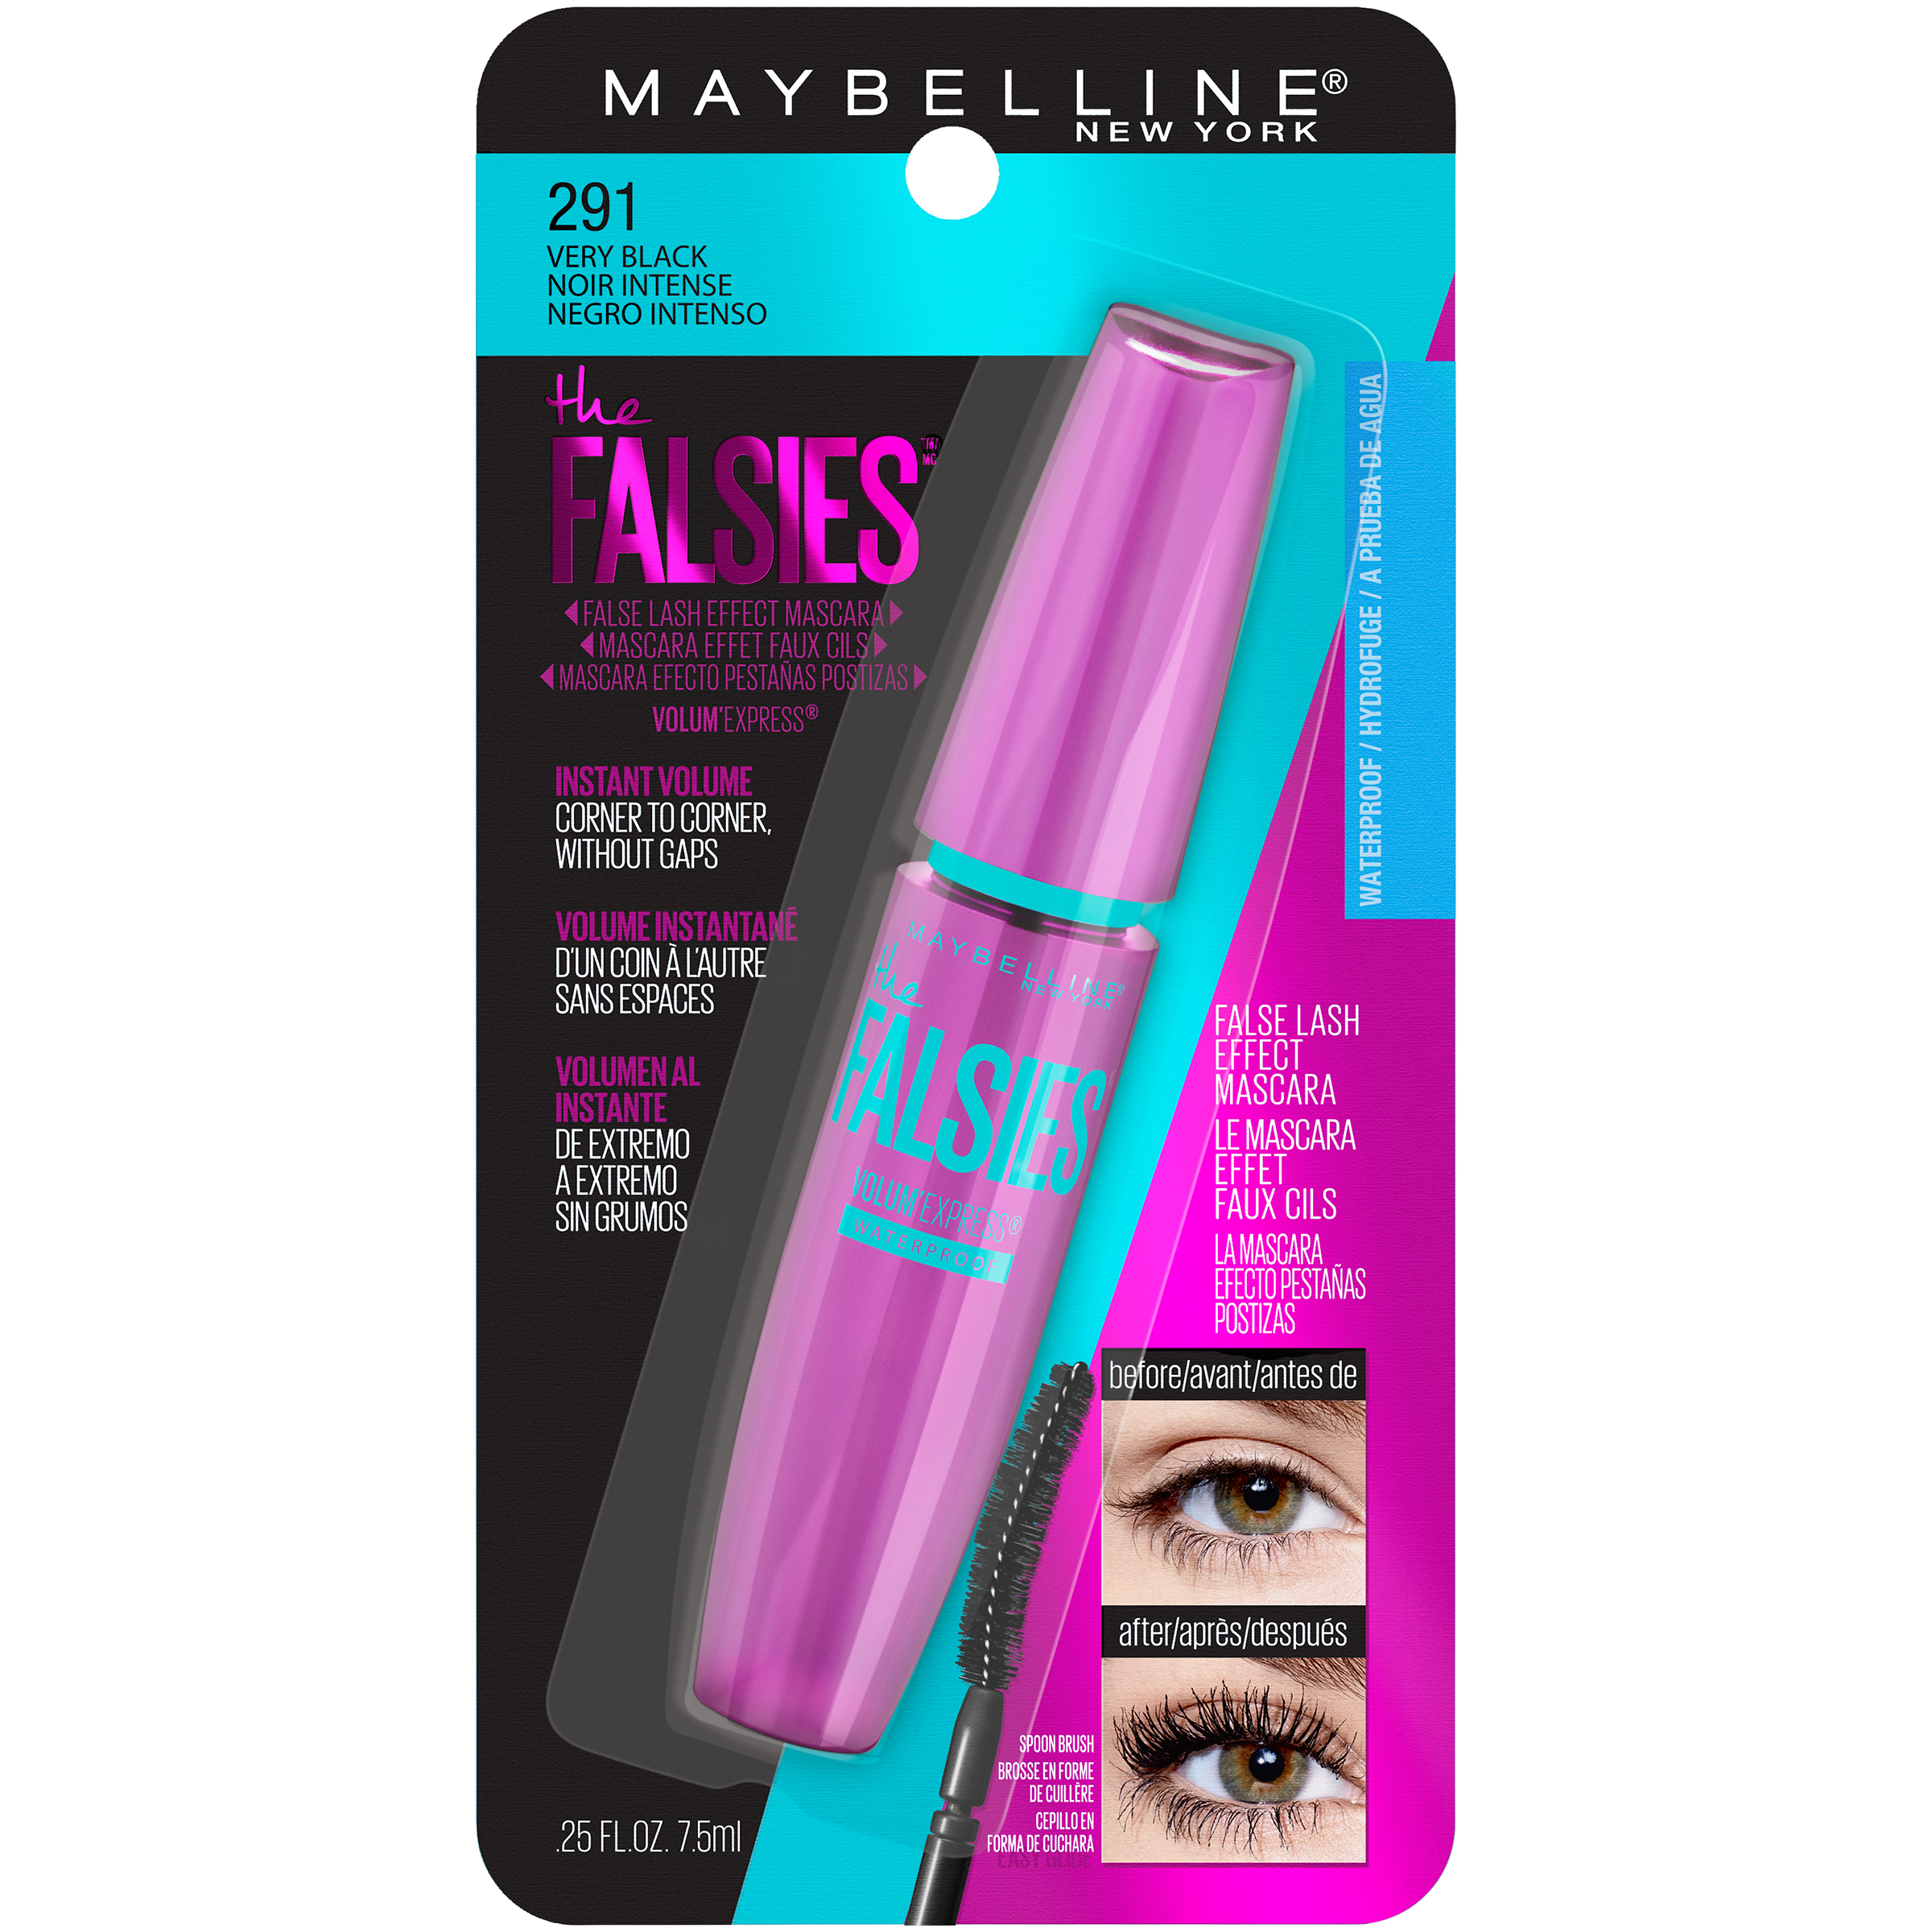 Volum Express The Falsies Mascara Waterproof - 291 Very Black by Maybelline for Women - 0.25 oz Mascara - image 3 of 18